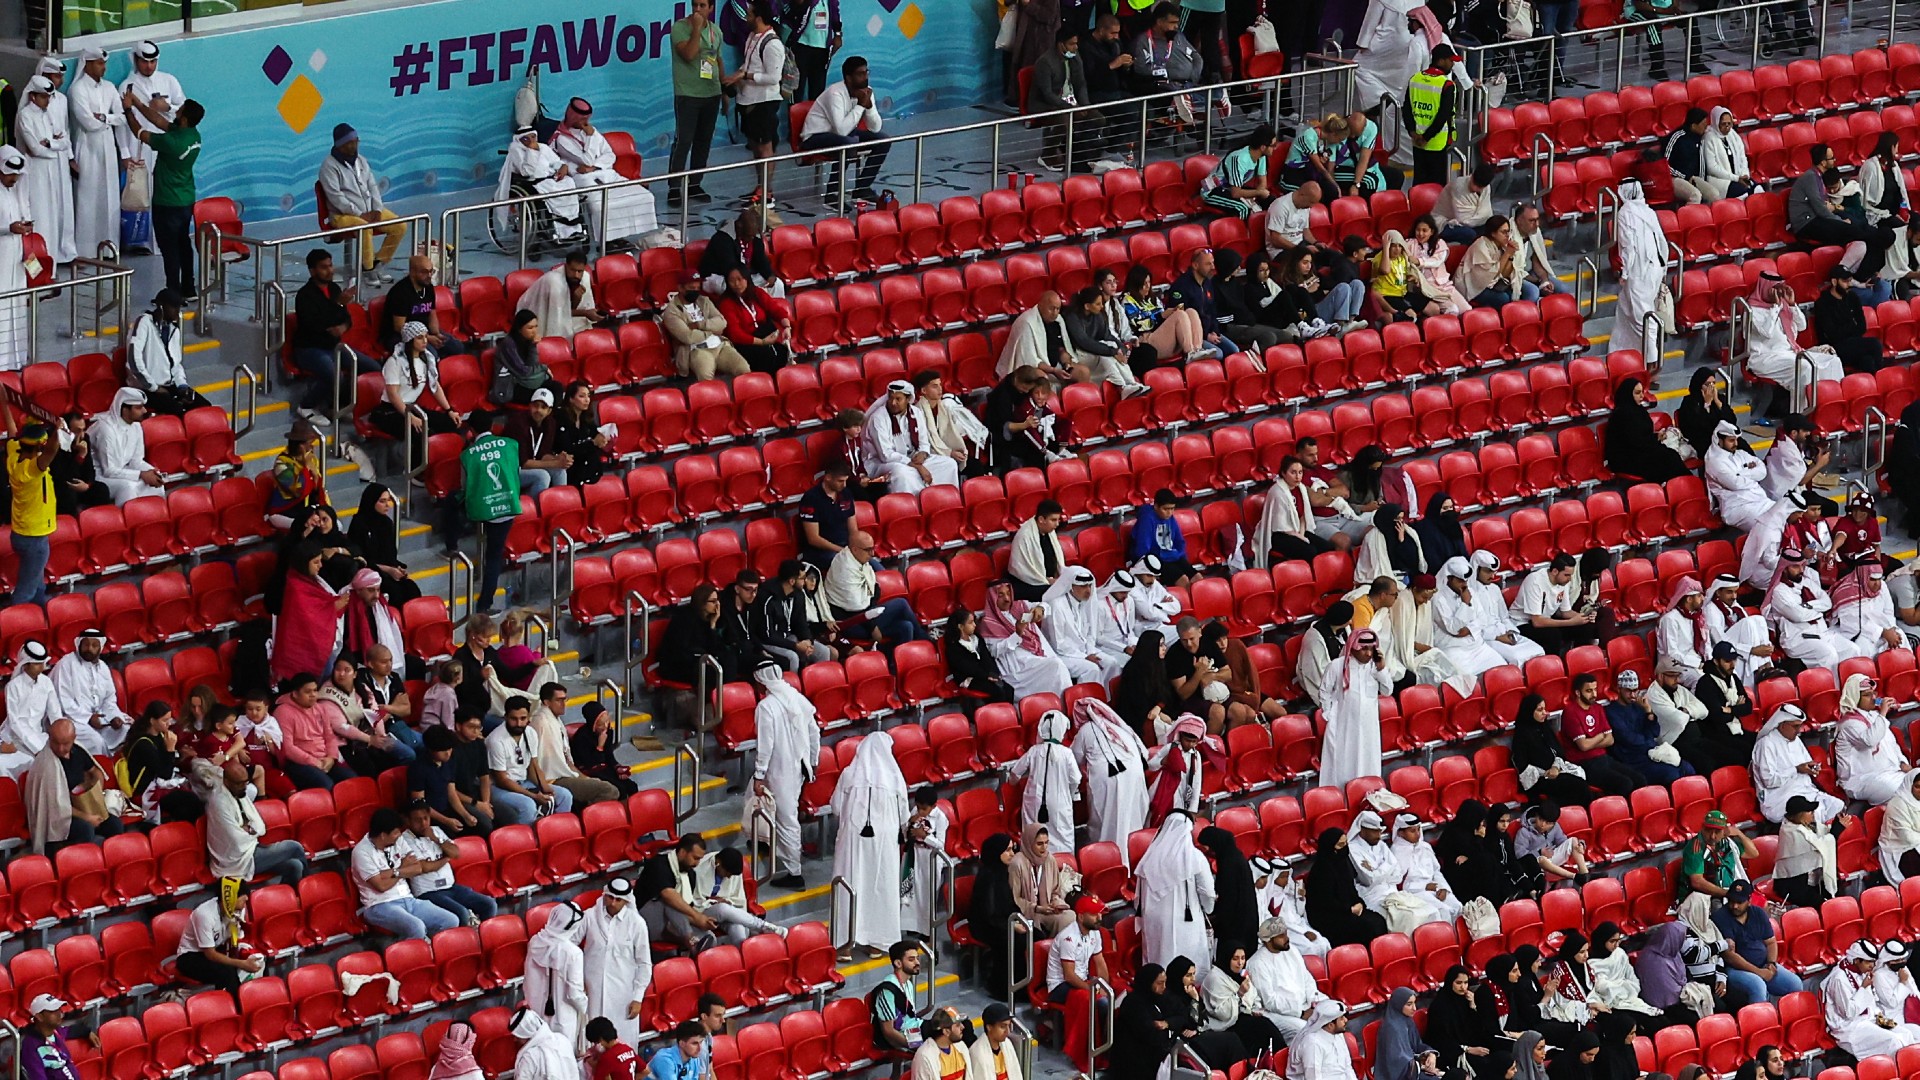 Qatar boss has no complaints after fans leave early